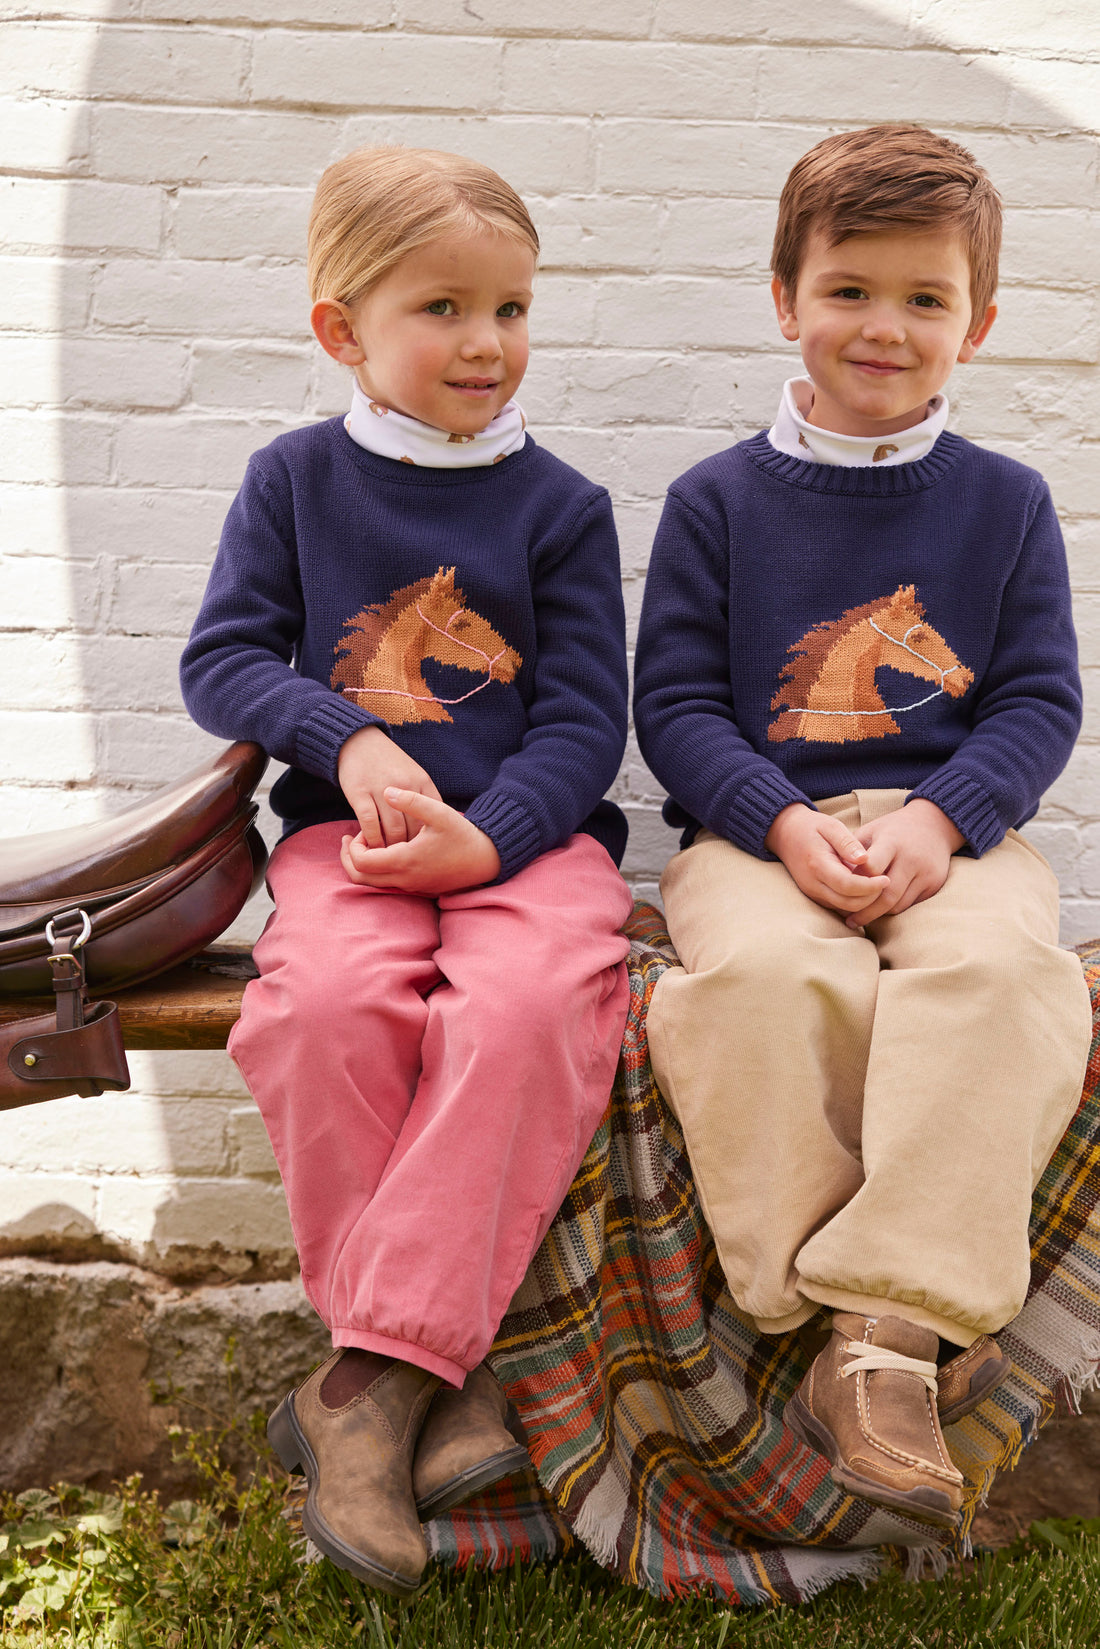 Little English classic childrens clothing girls turtleneck with printed horses